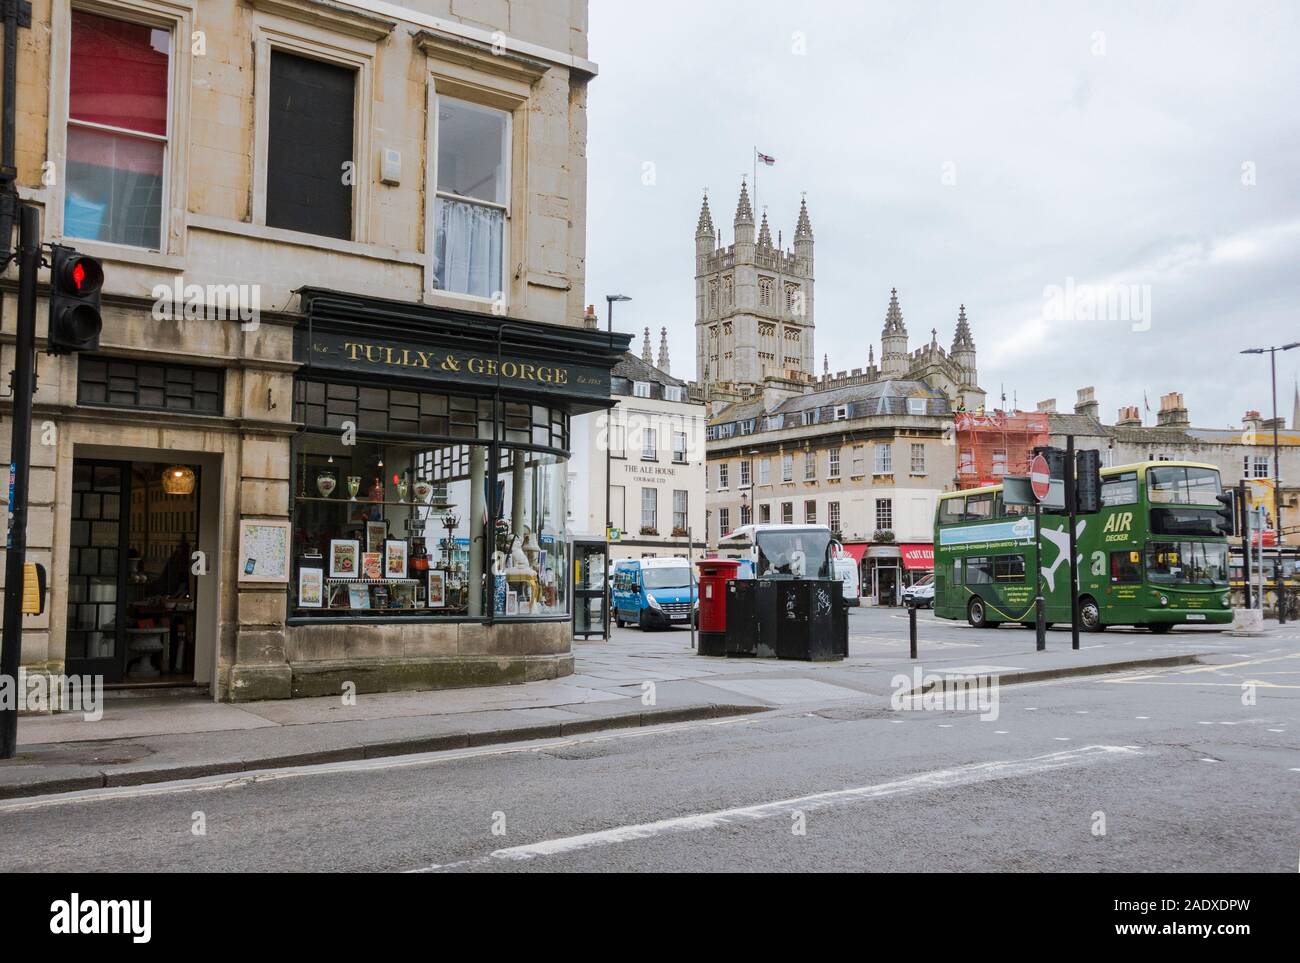 Street view of city centre of Bath, with Abbey, and double decker, England, United Kingdom, Europe Stock Photo